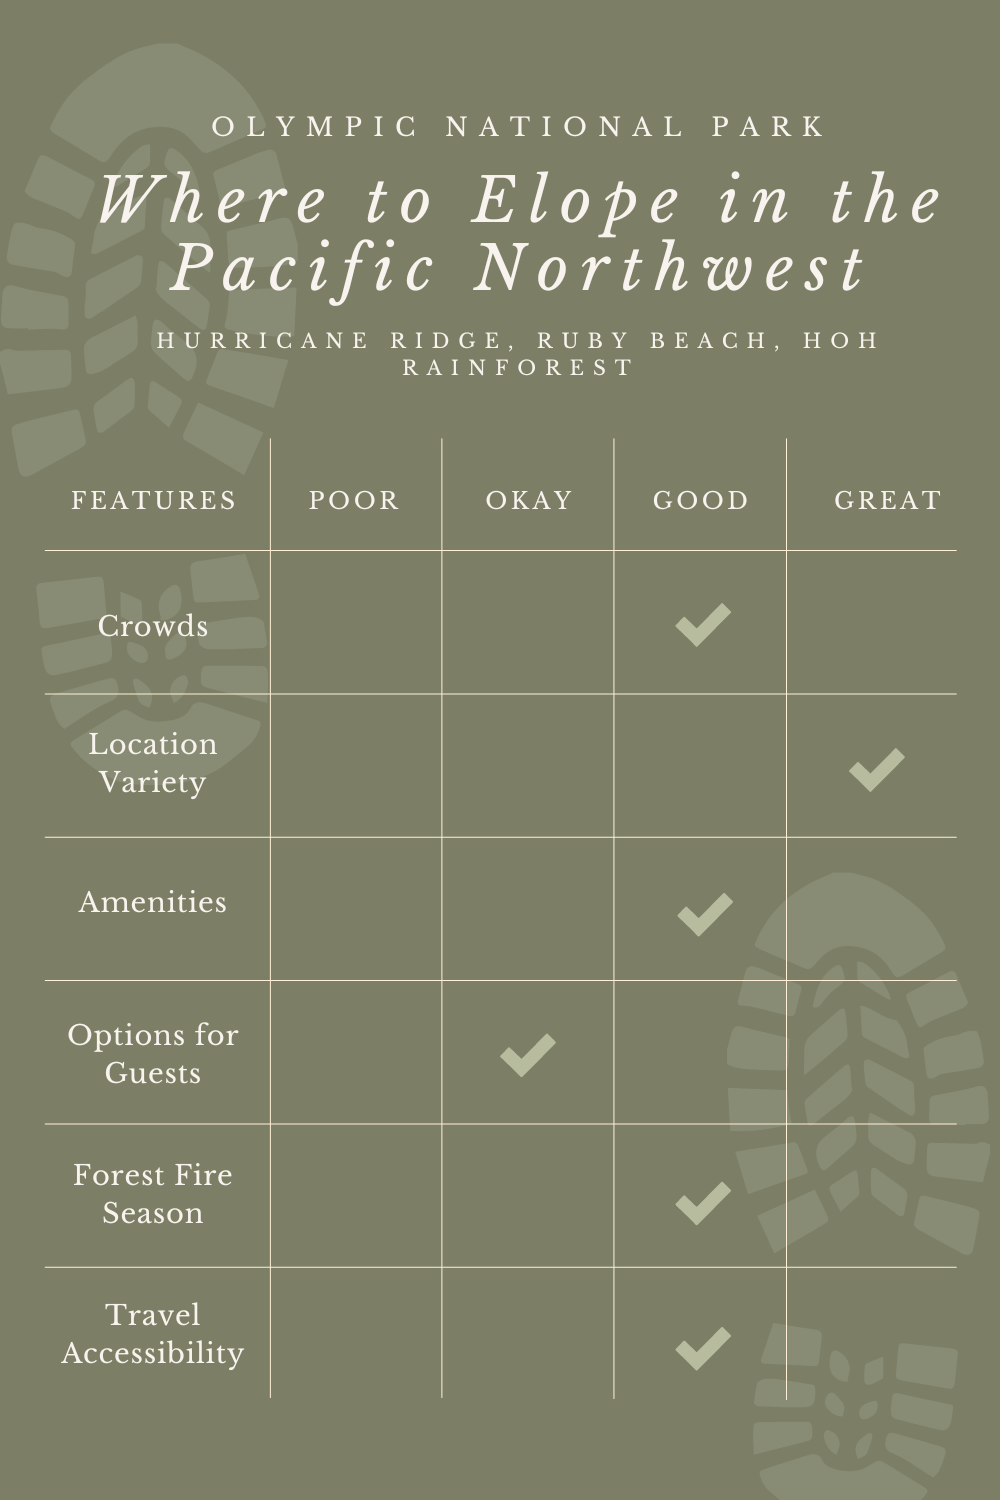 Where to elope in the Pacific Northwest - Olympic National Park graphic